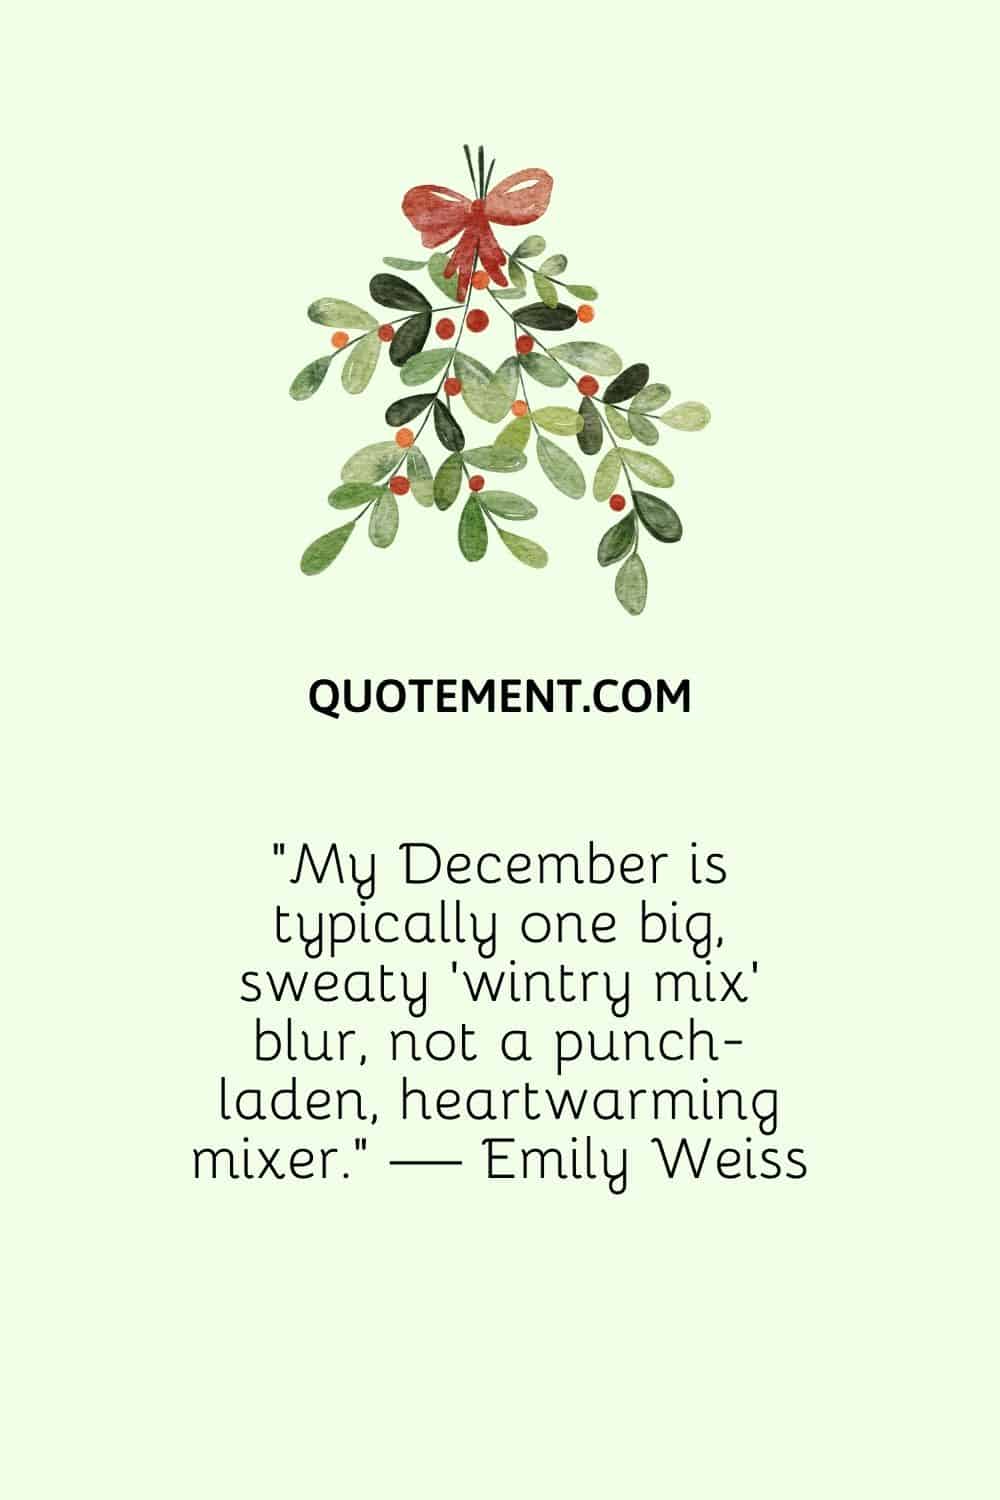 My December is typically one big, sweaty 'wintry mix' blur, not a punch-laden, heartwarming mixer. — Emily Weiss